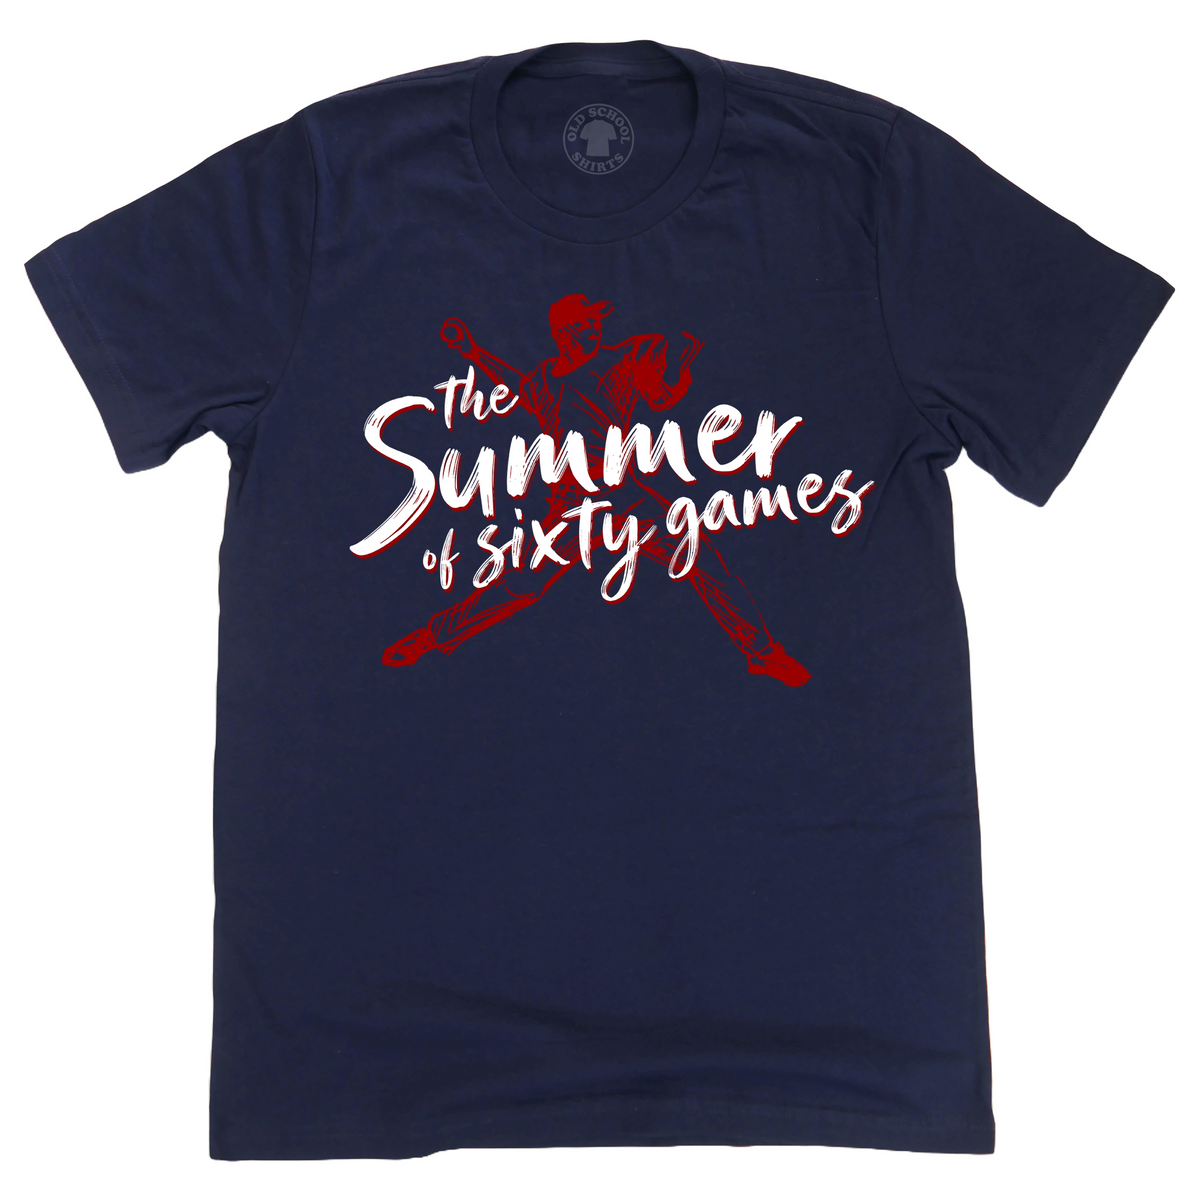 The Summer of Sixty Games - Navy Tee